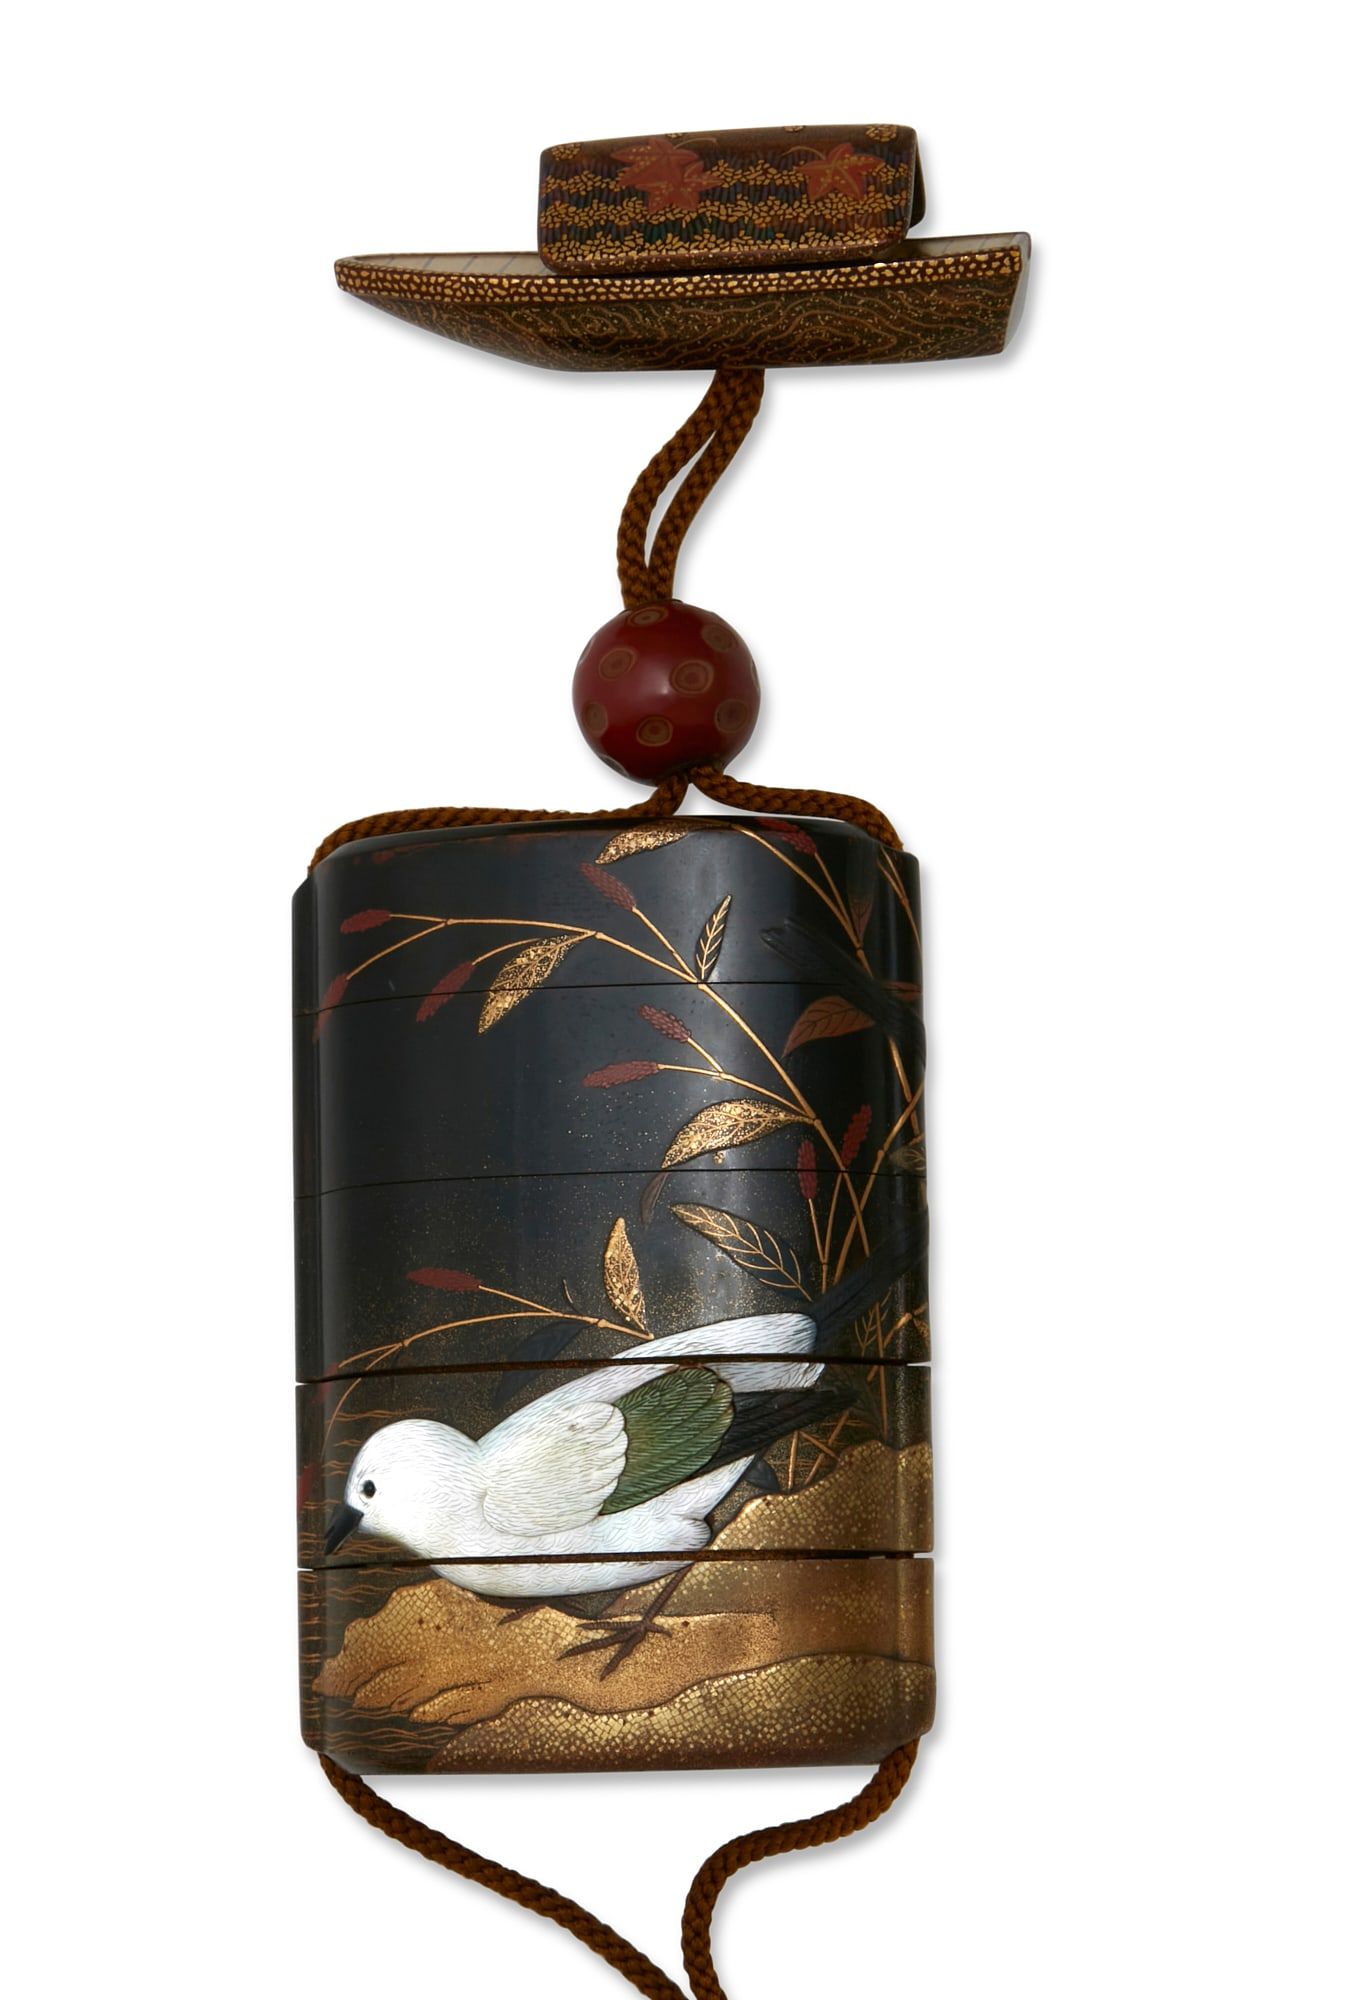 A JAPANESE INLAID LACQUERED INRO